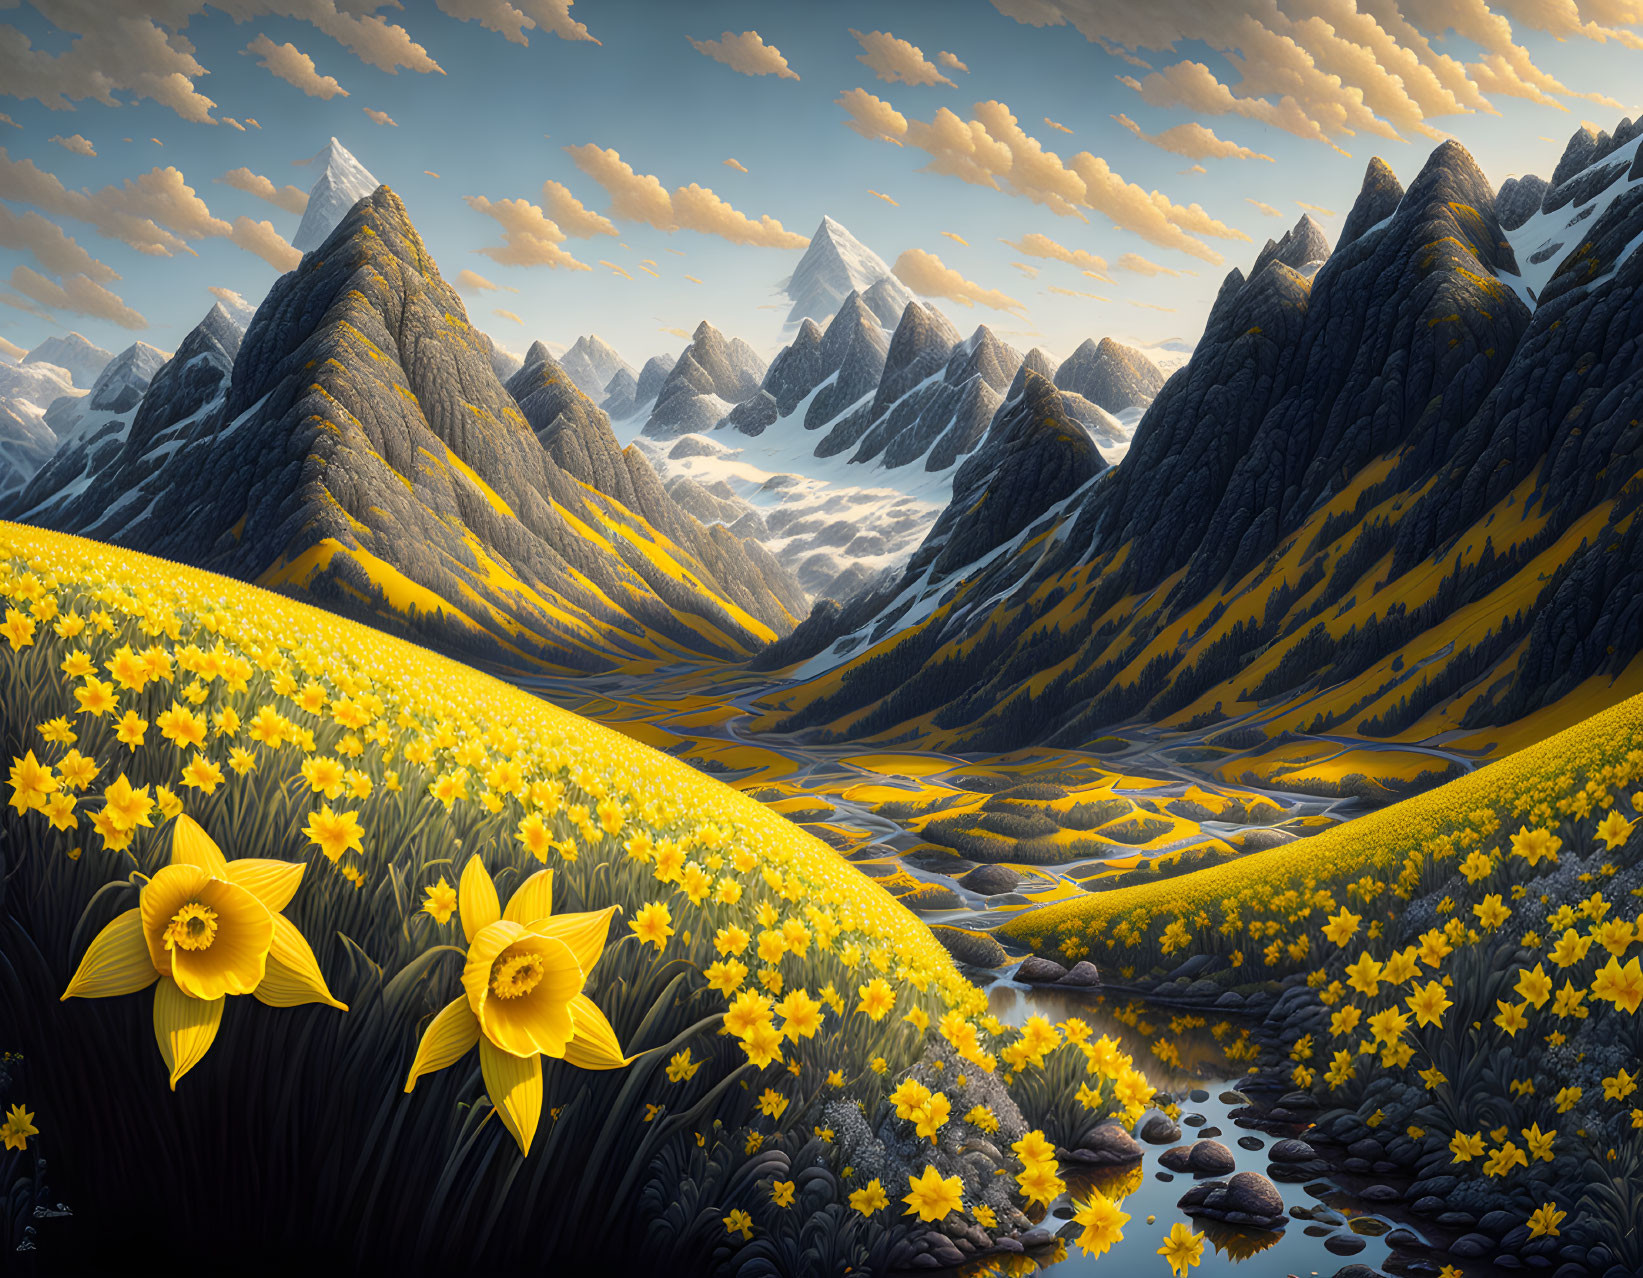 Scenic landscape with yellow flower fields, mountains, and stream